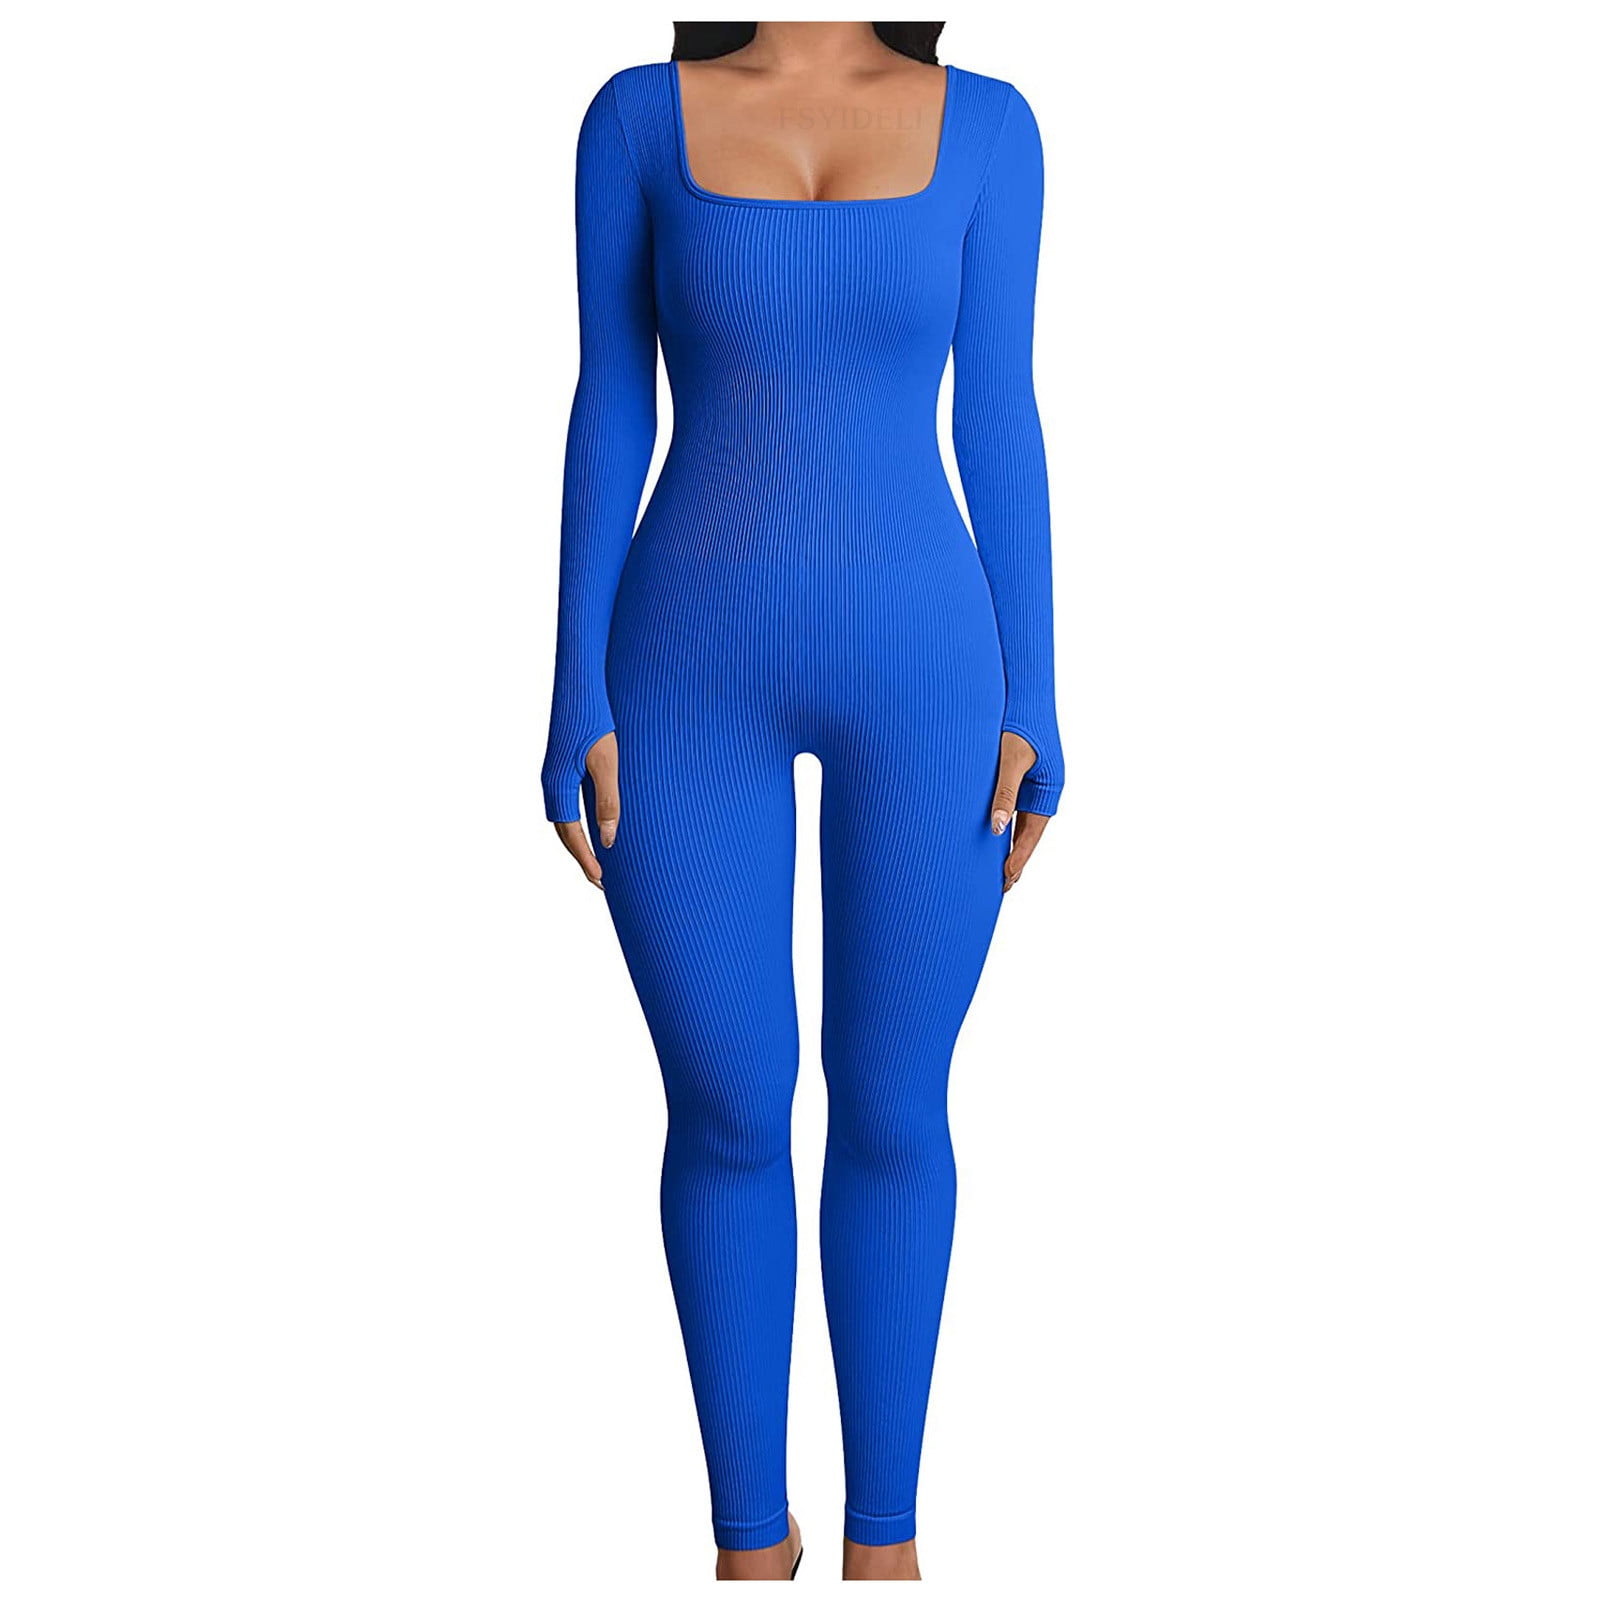 DxhmoneyHX Jumpsuits for Women Scoop Neck Long Sleeve Stretchy